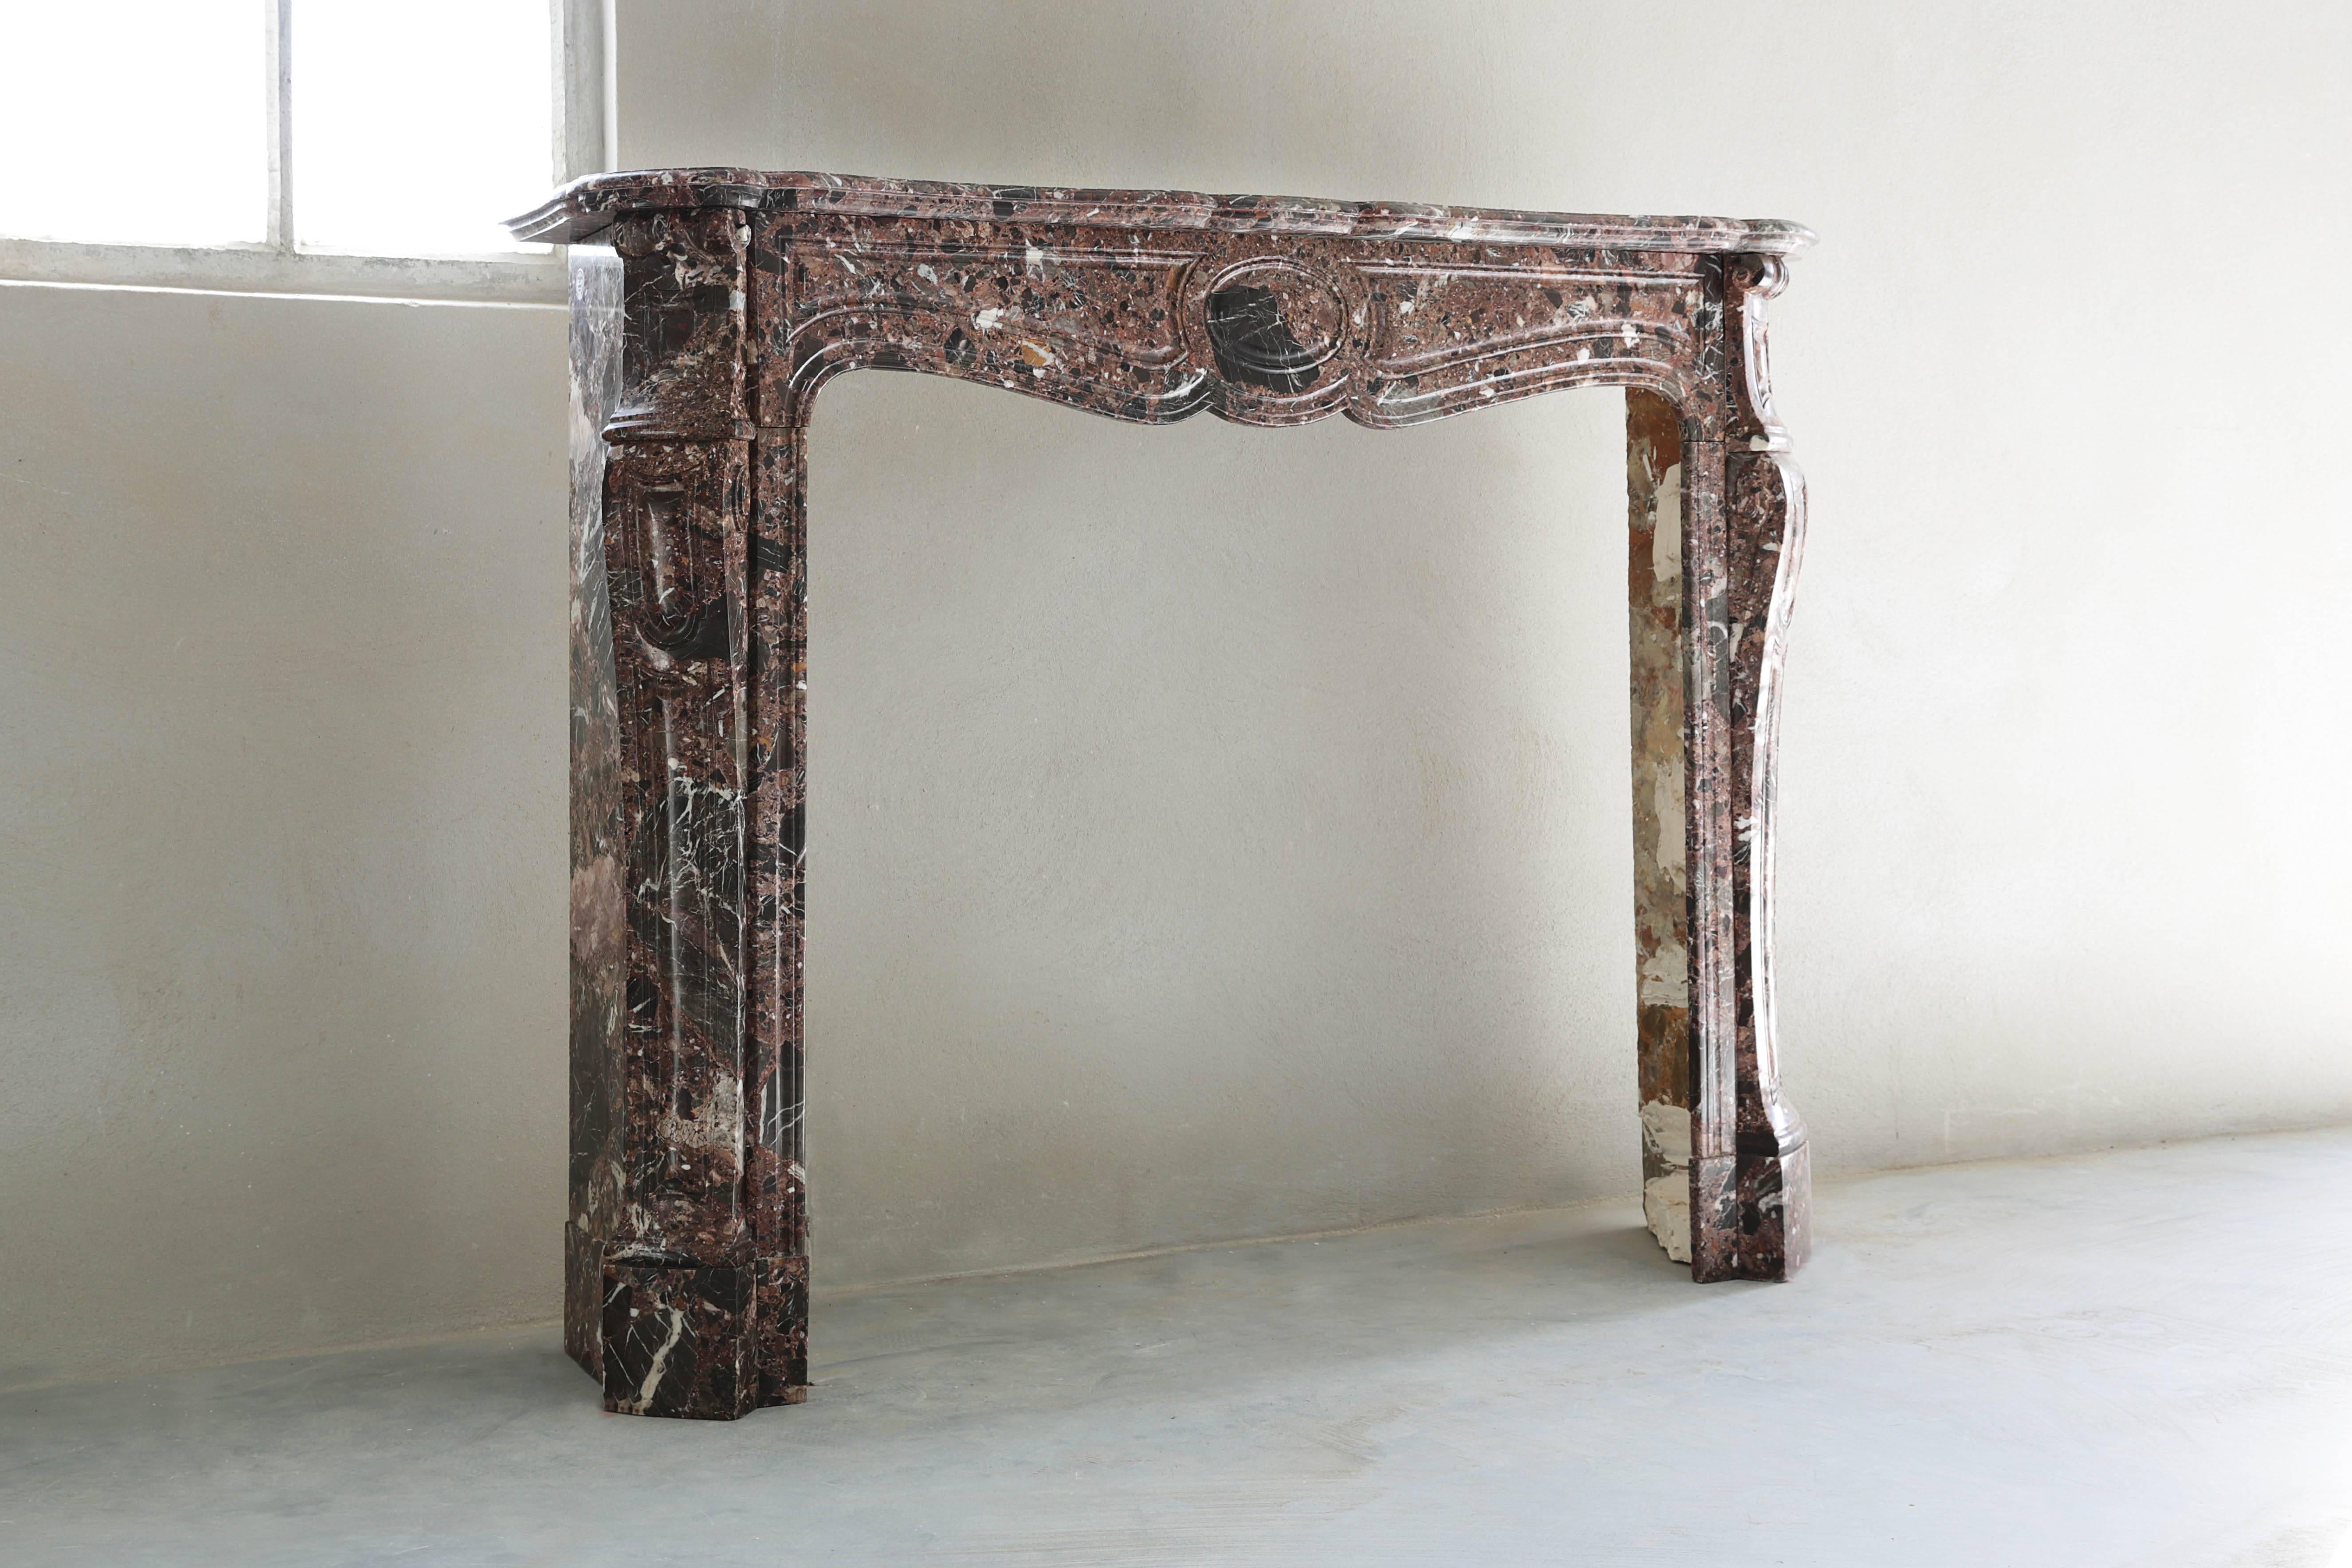 An elegant and nice marble fireplace in the style of Pompadour. We found this beautiful antique fireplace in Paris.